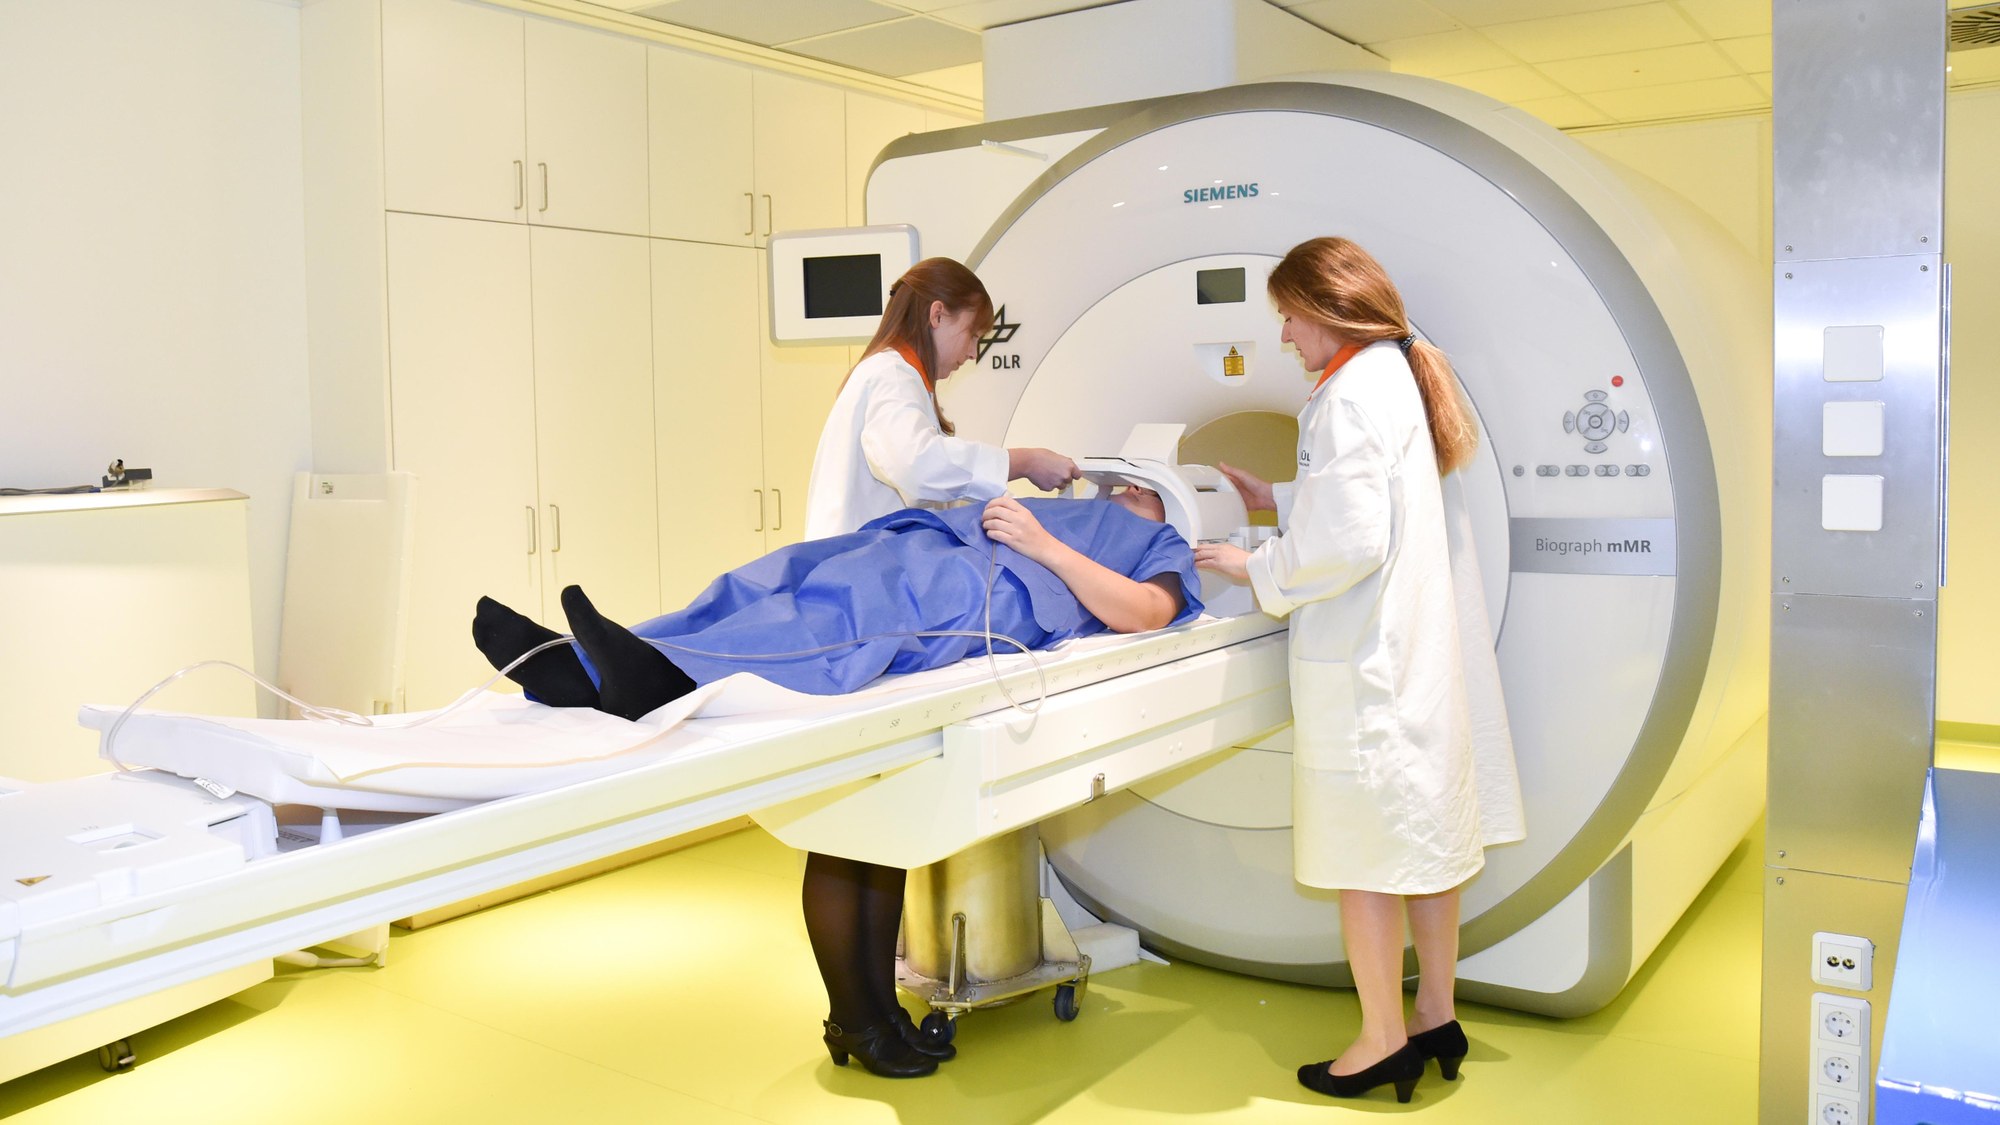 Examinations in the magnetic resonance imaging scanner